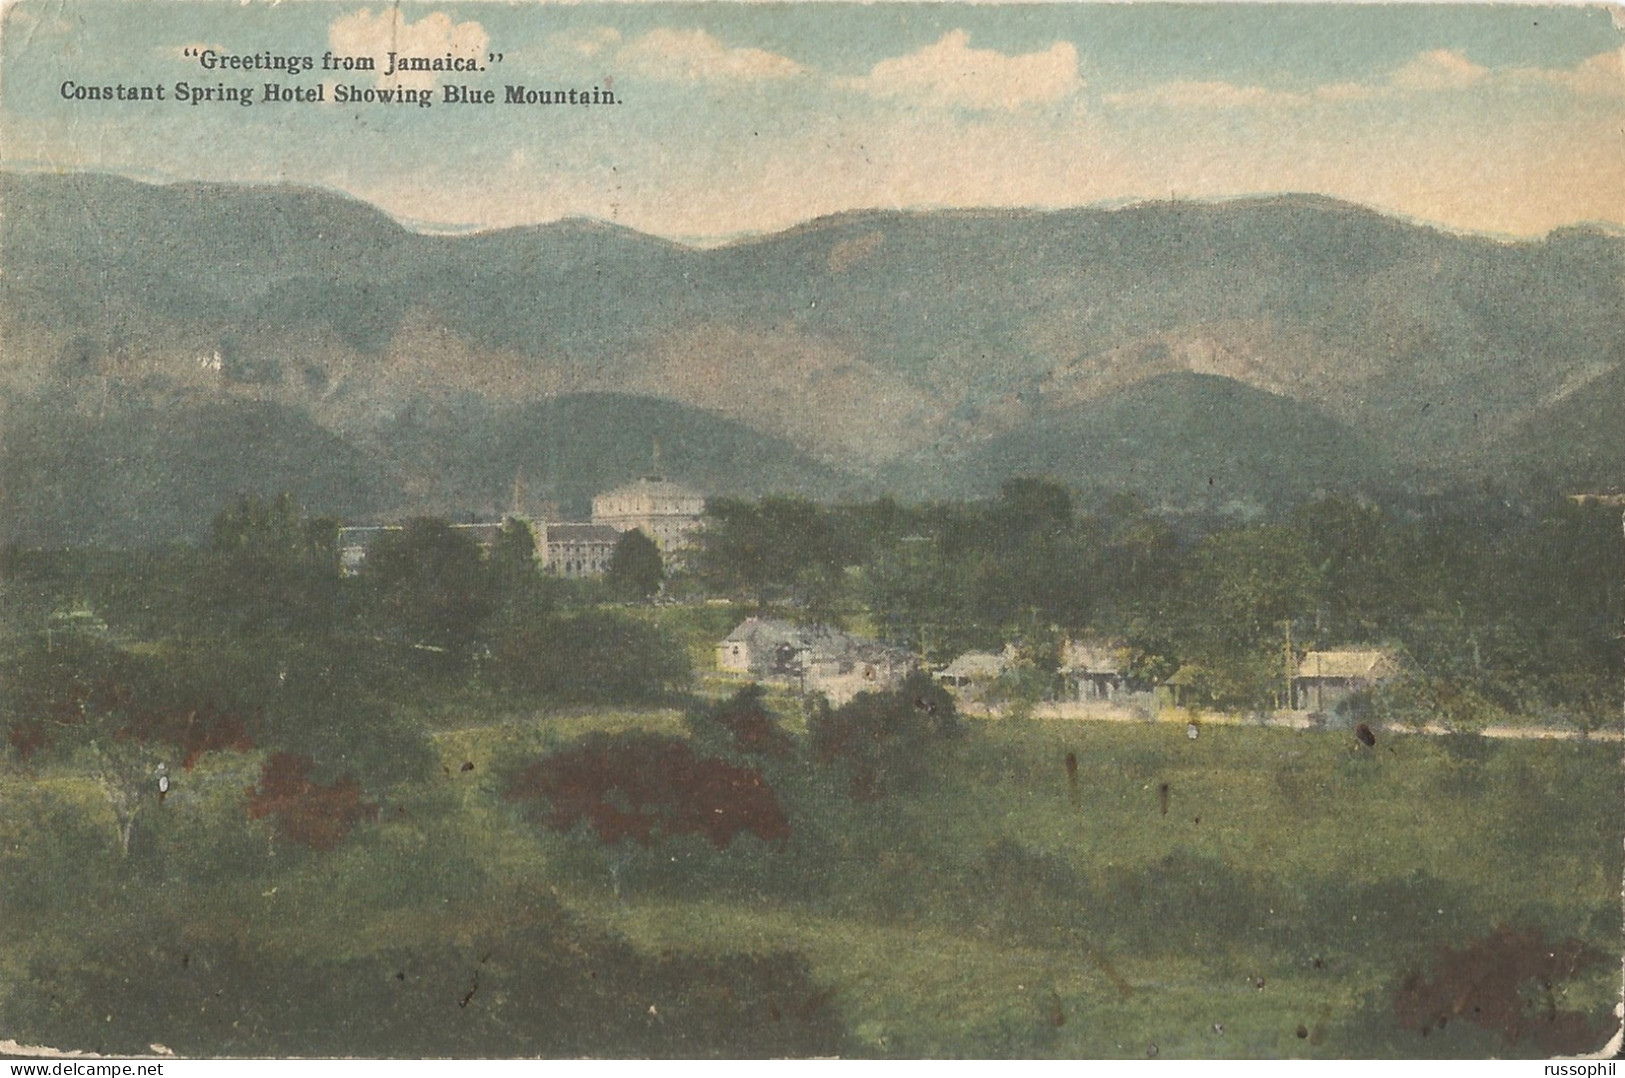 JAMAICA - CONSTANT SPRING HOTEL SHOWING BLUE MOUNTAINS - GREETINGS FROM JAMAICA - PUB. DUPERLY - 1927 - Jamaïque